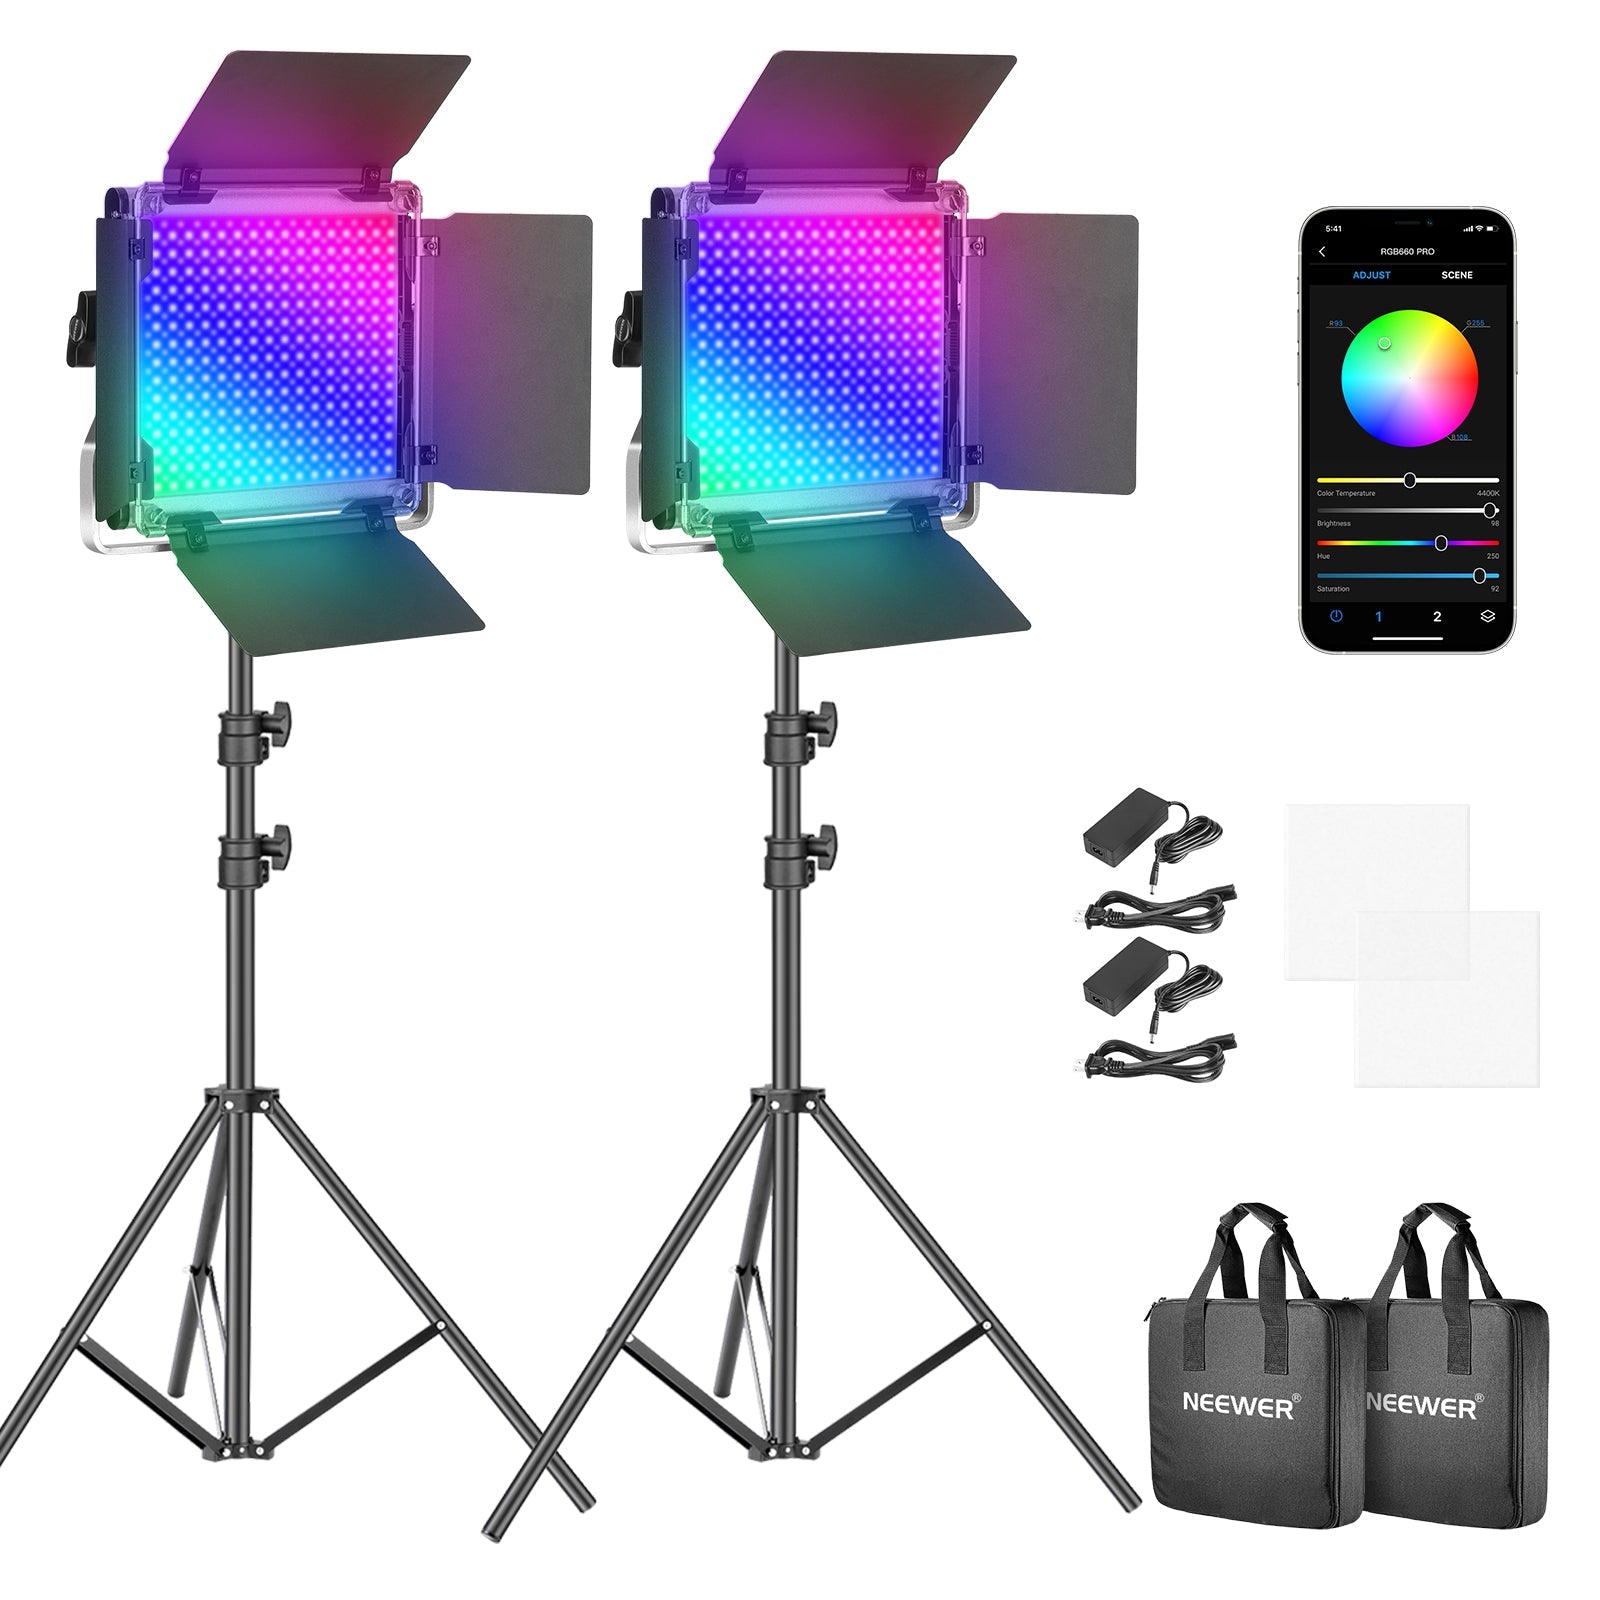 Neewer 2 Packs of 50W RGB 660 PRO Led Video Light Kit with APP Control